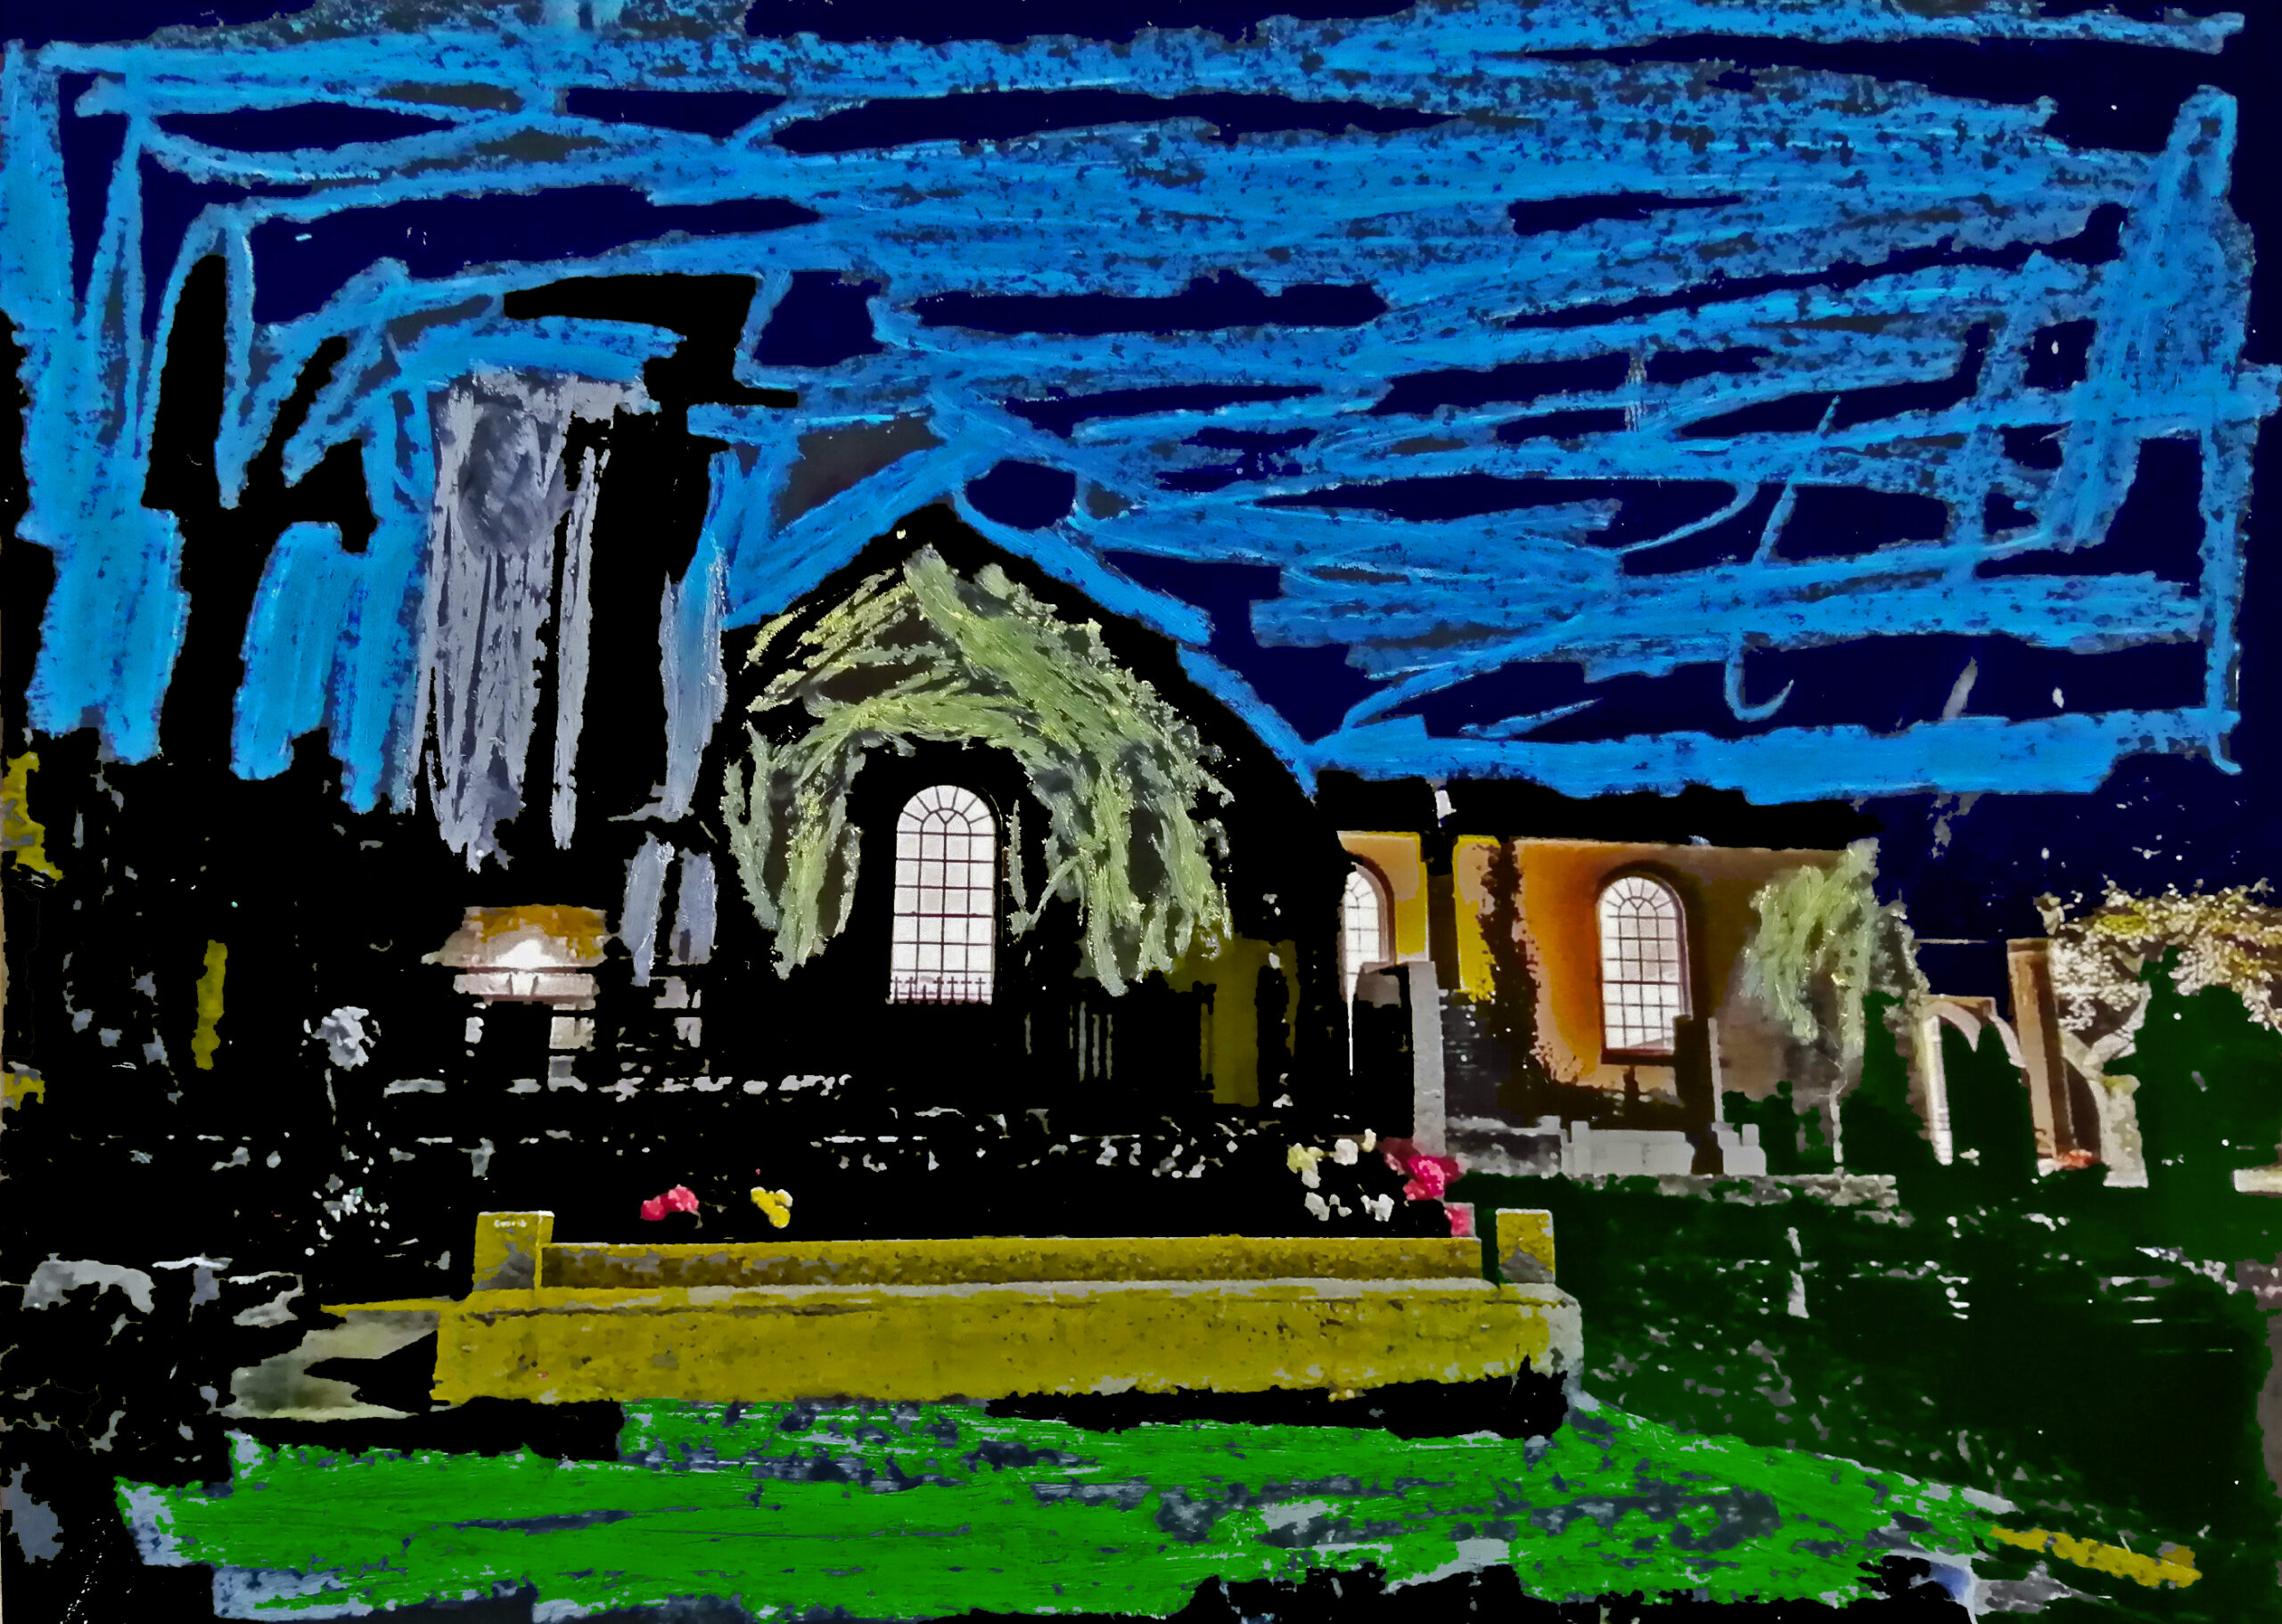 Bushy Park Church is an abstract photo taken in Galway, Ireland using oil pastel and acrylic paint over photo paper with blue, green, yellow, and red coloring.